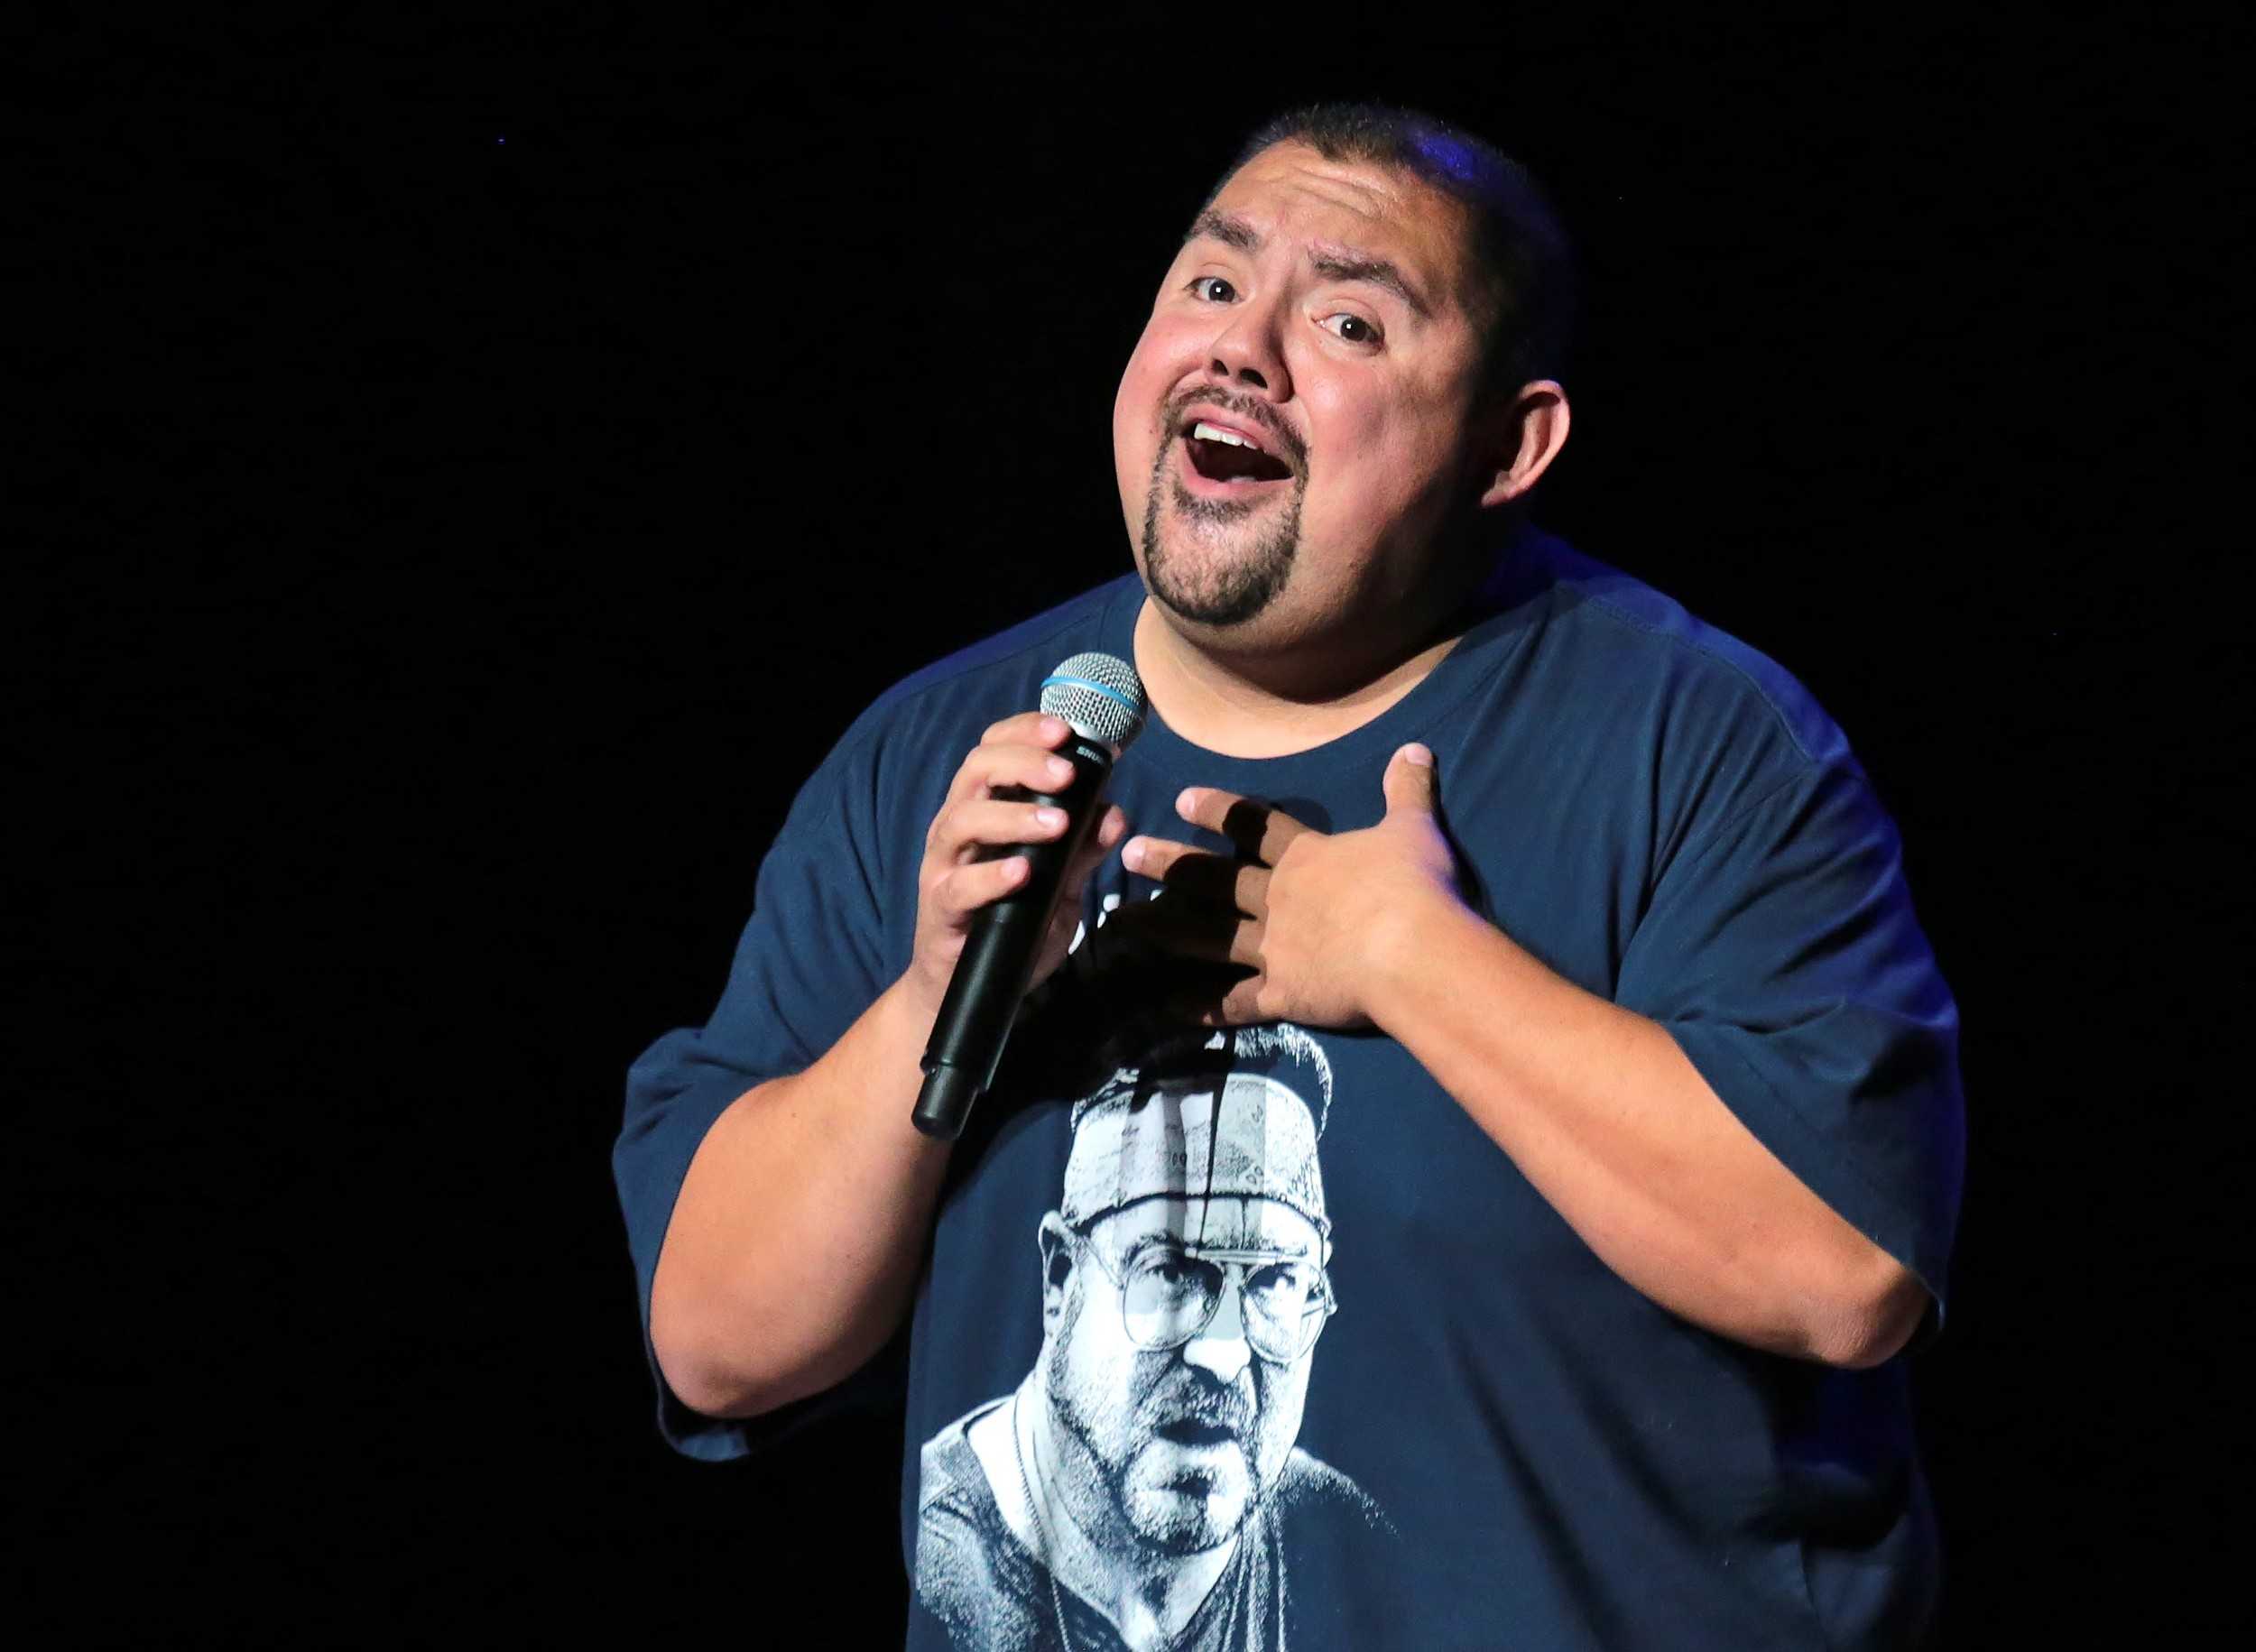 COURTESY // Will BucquoyGabriel Iglesias performed at Weill Hall as part of his “United Through Laughter” comedy tour on Friday.